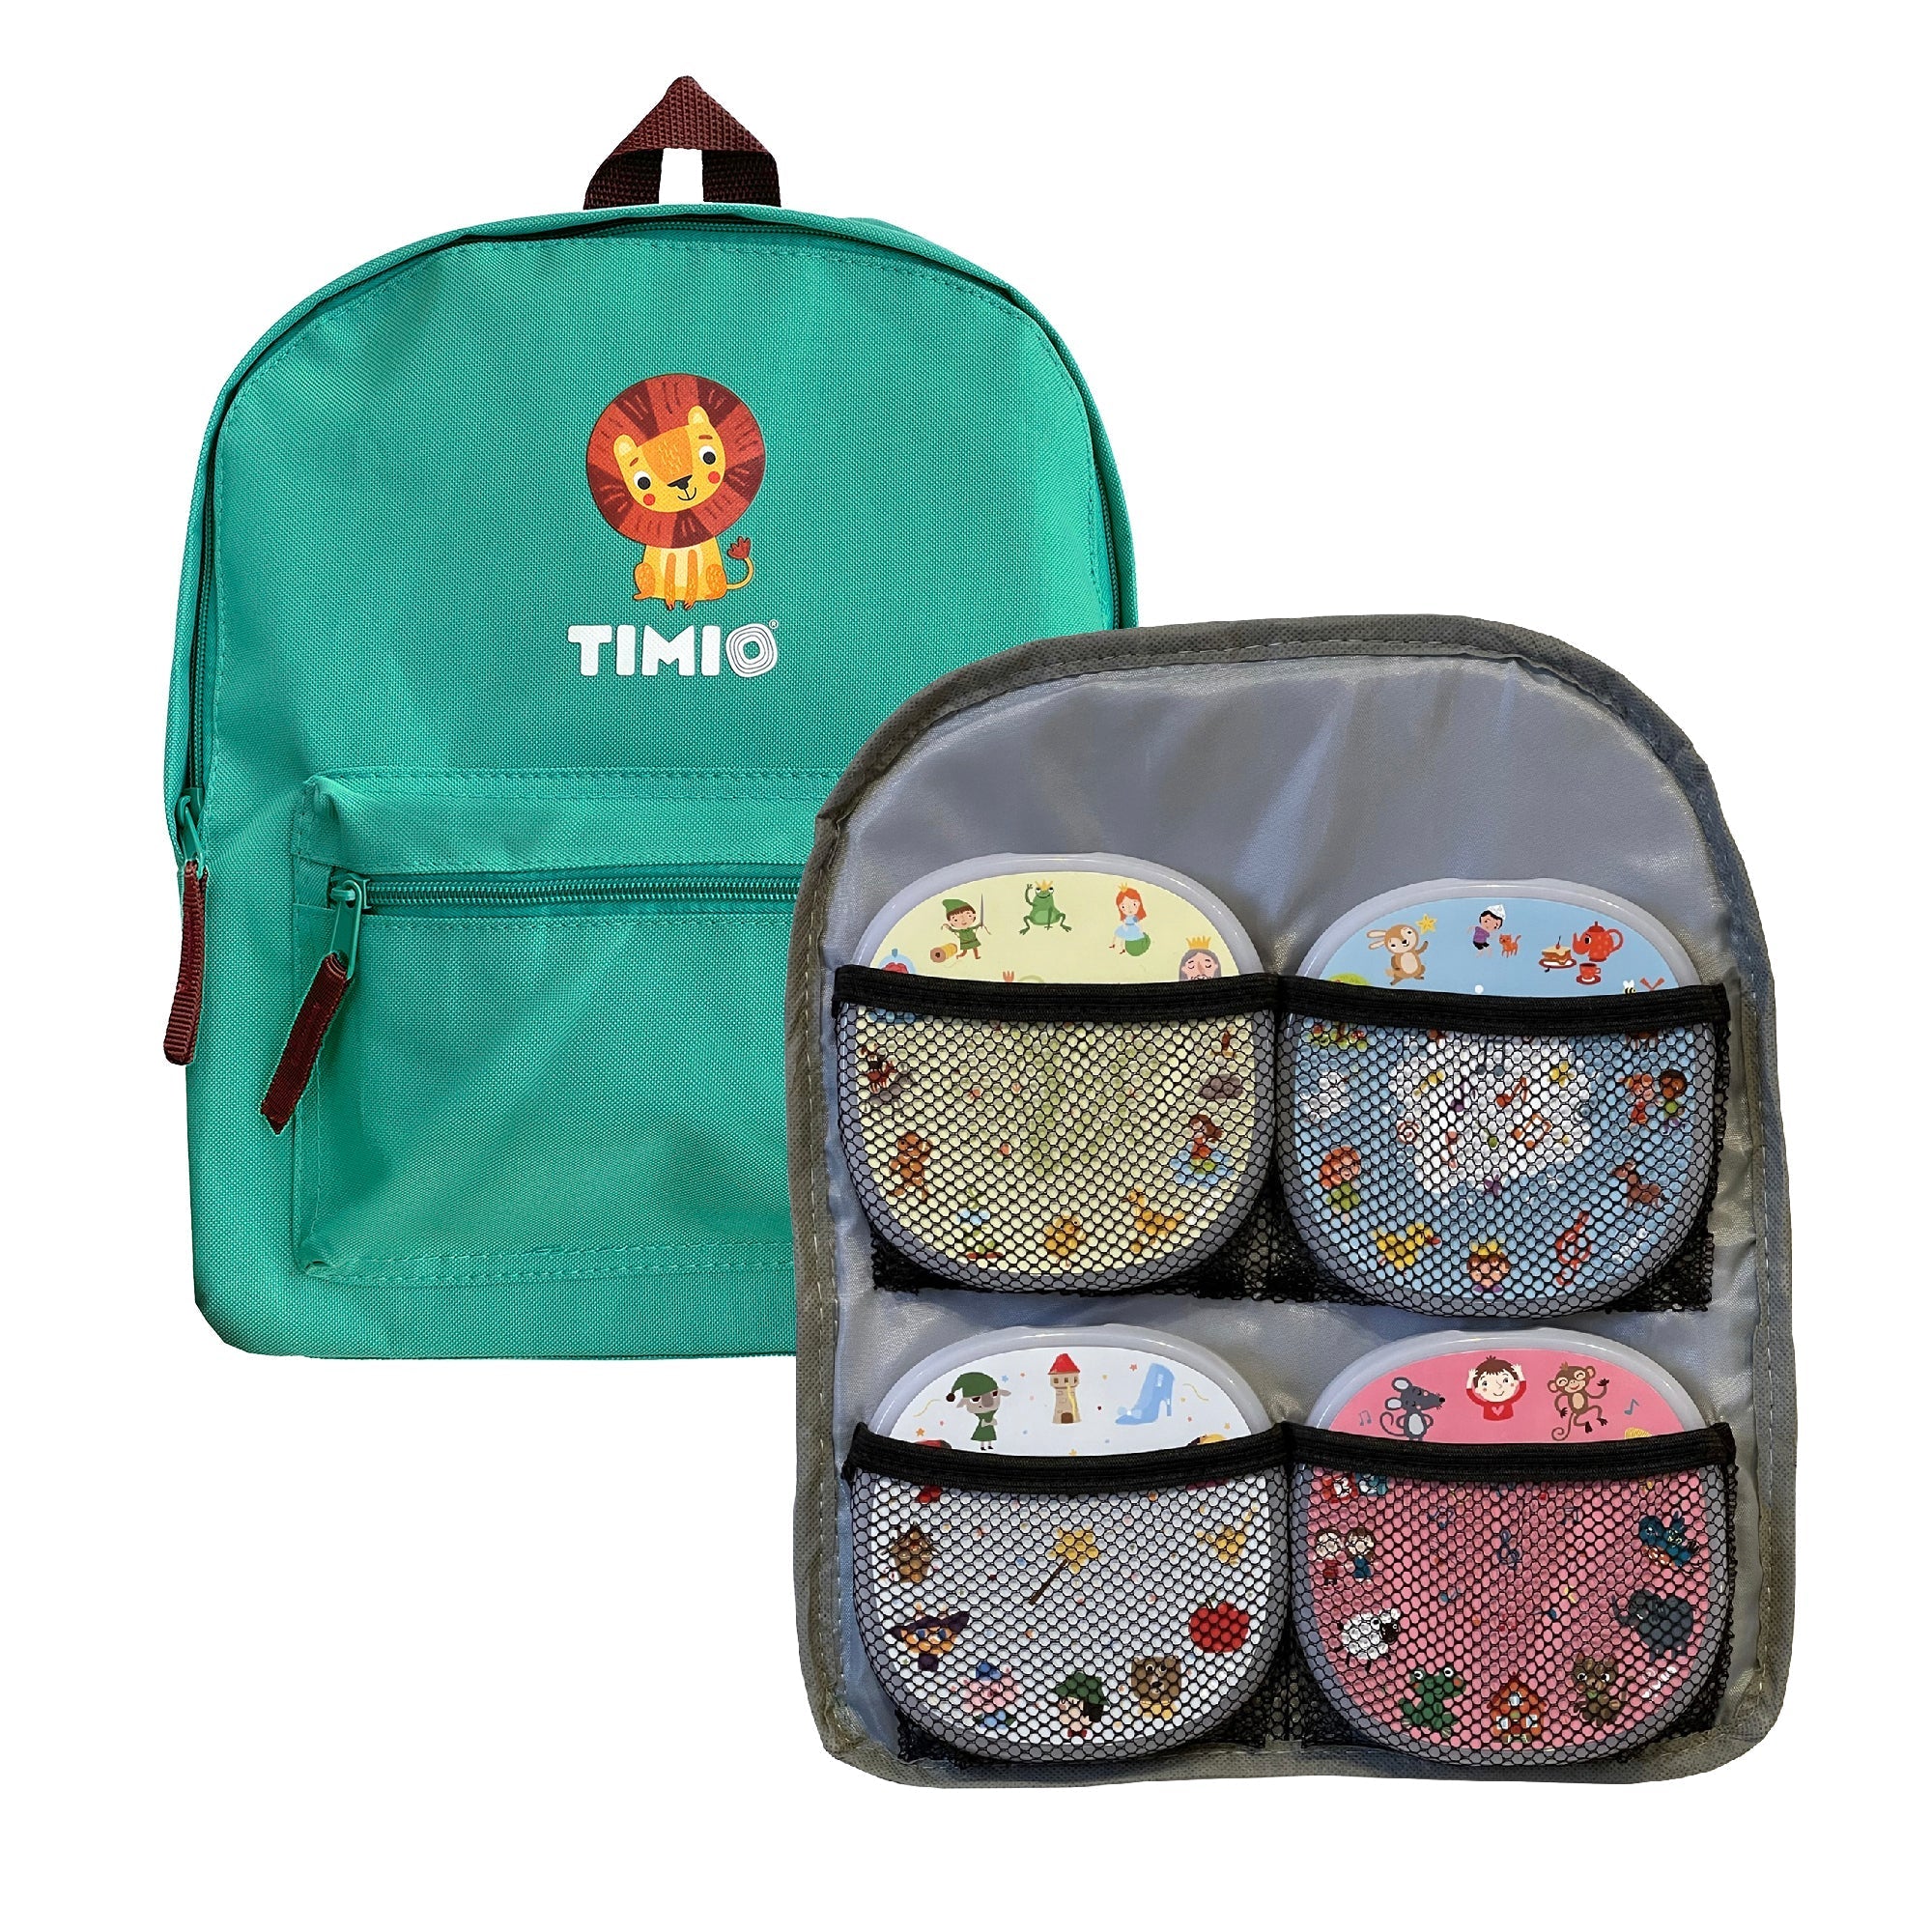 Timio: Timio Backpack for player and disks